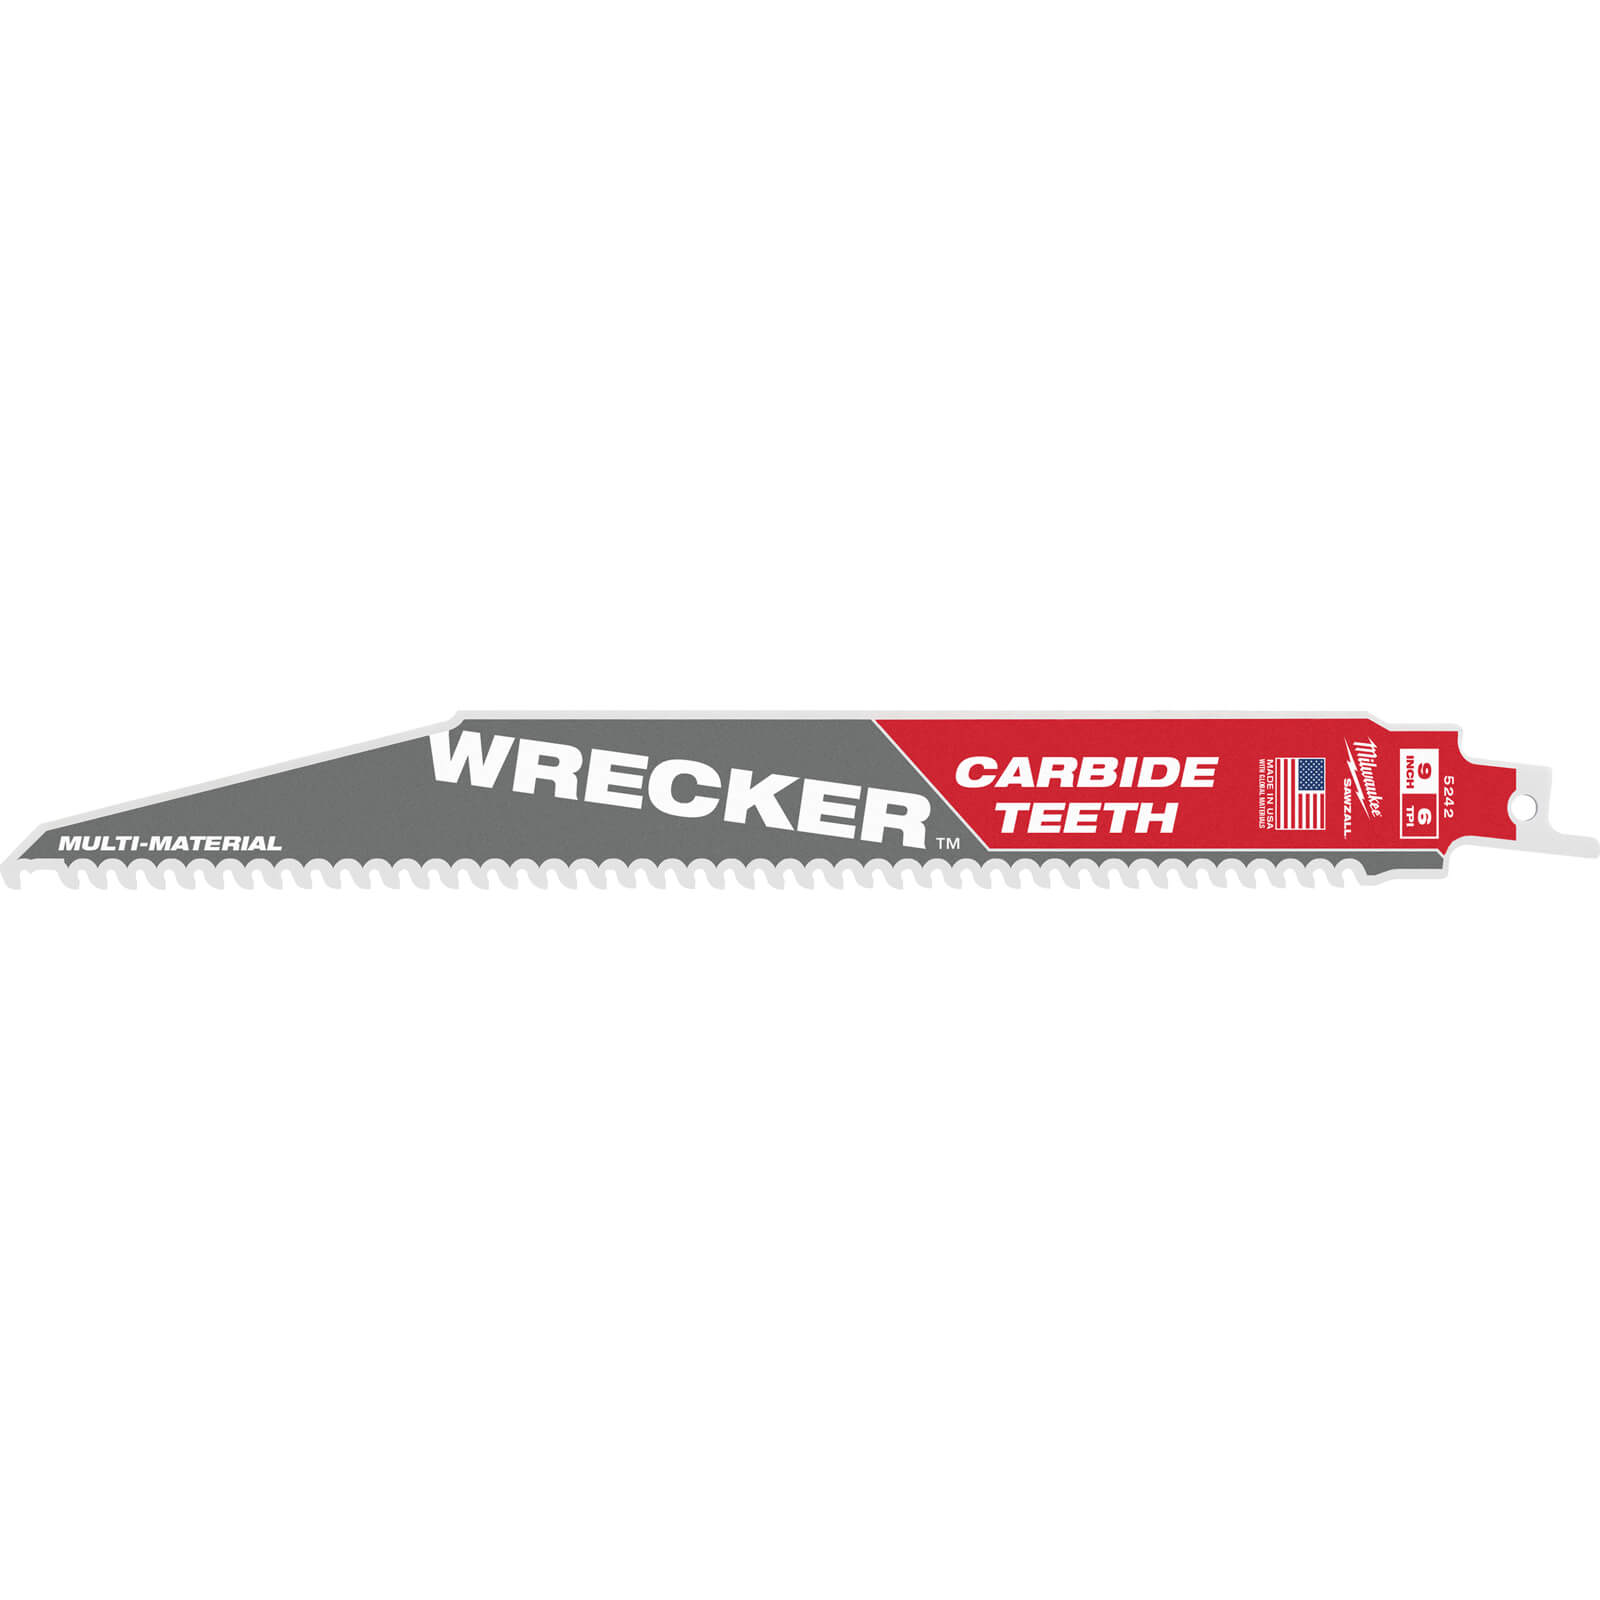 Image of Milwaukee Heavy Duty WRECKER Carbide Demolition Saw Blades 230mm Pack of 1